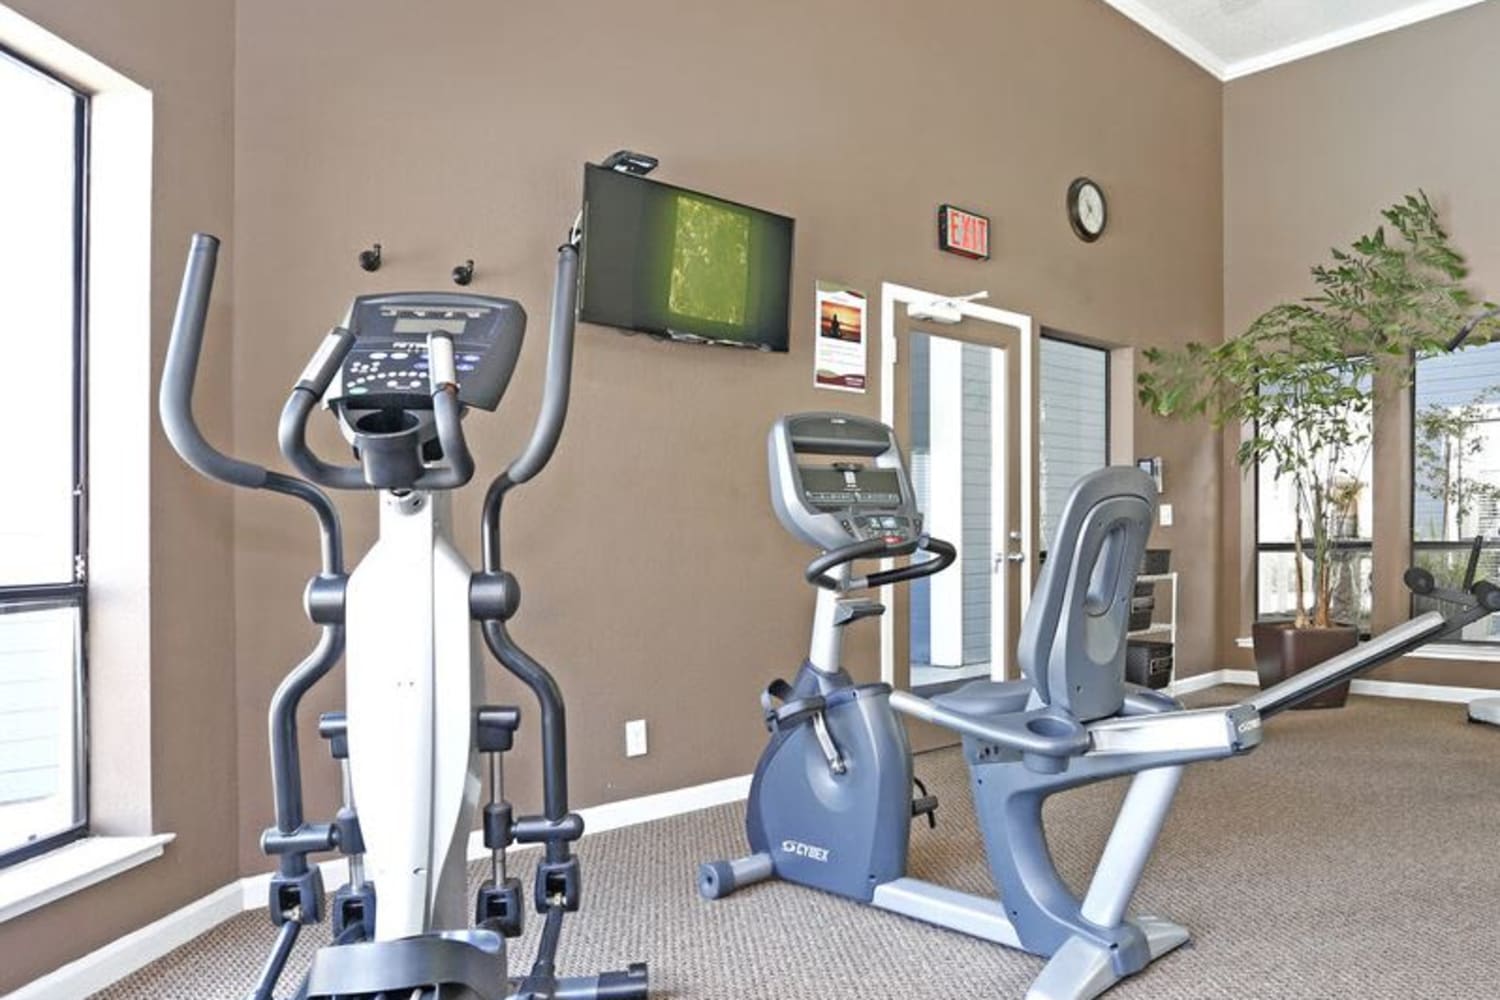 Elliptical at Amber Court in Fremont, California